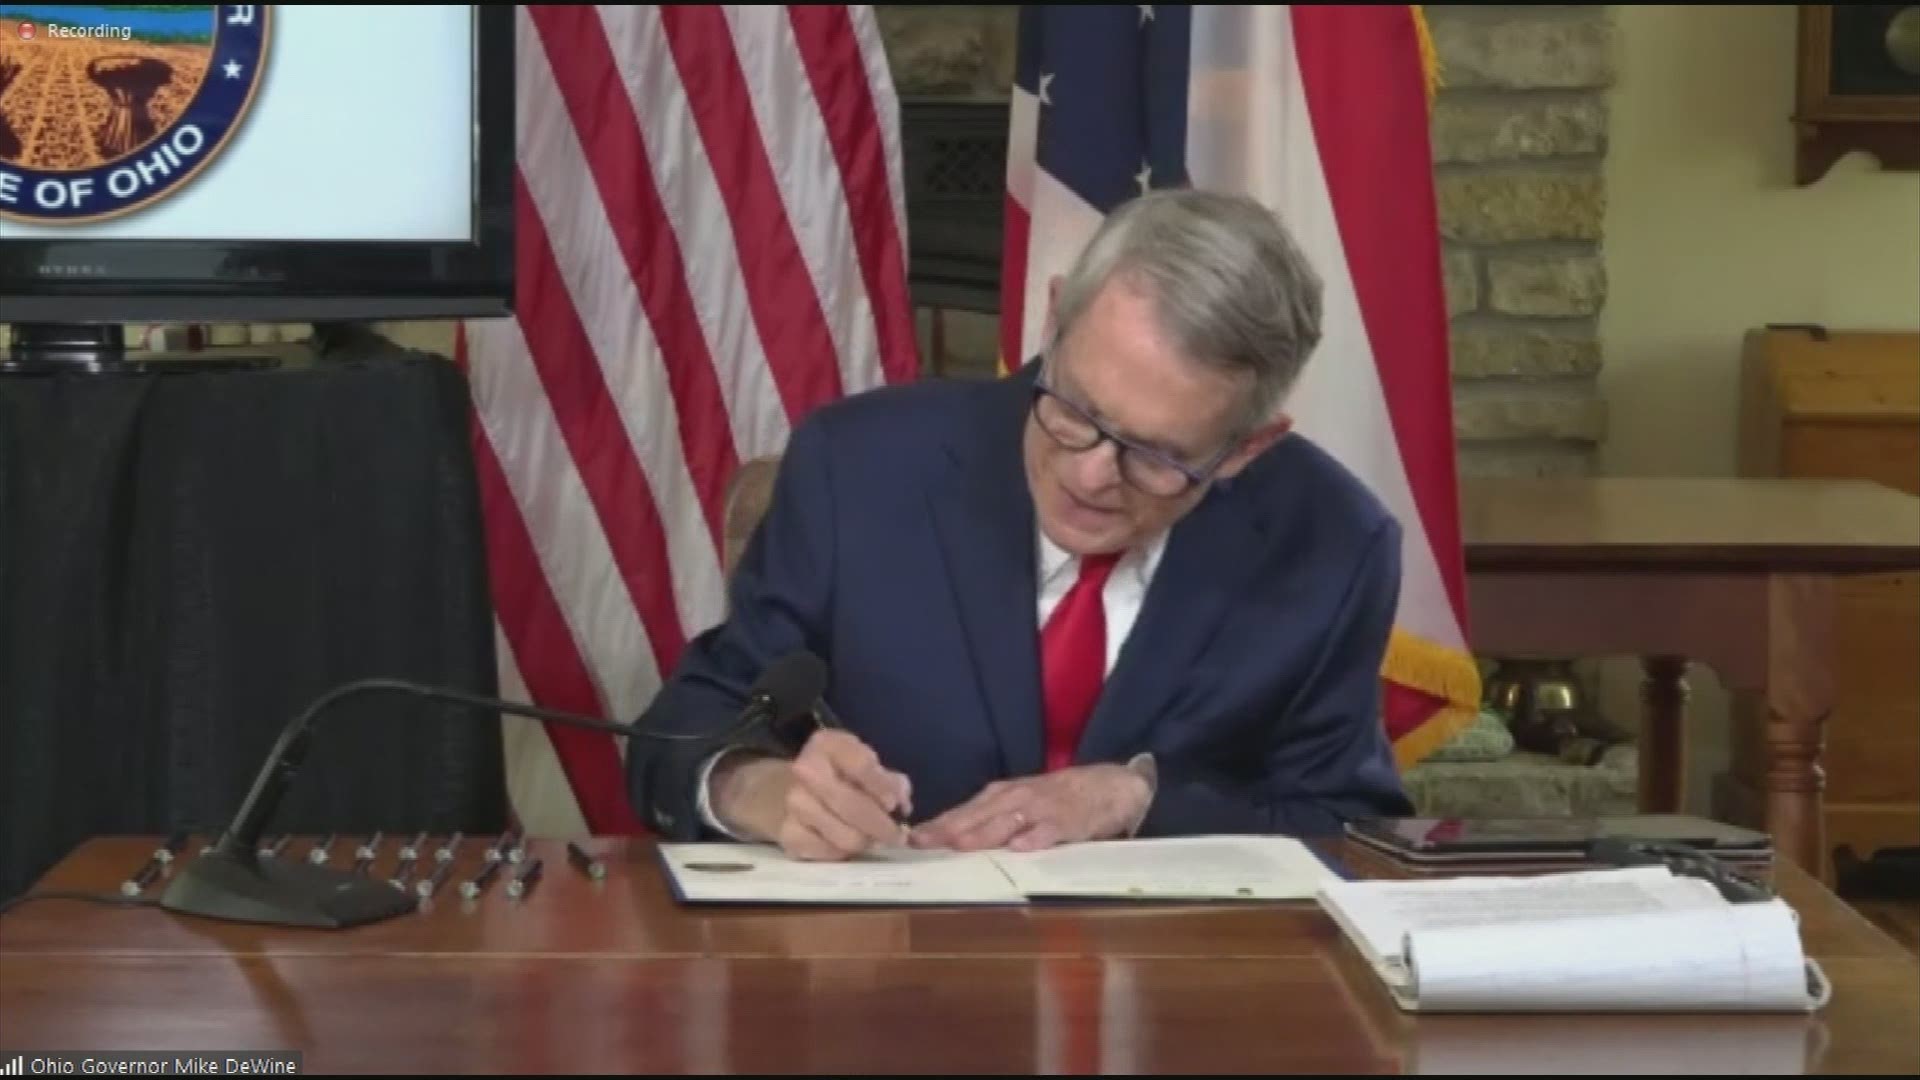 Ohio Governor Mike DeWine signed House Bill 606 into law Monday.